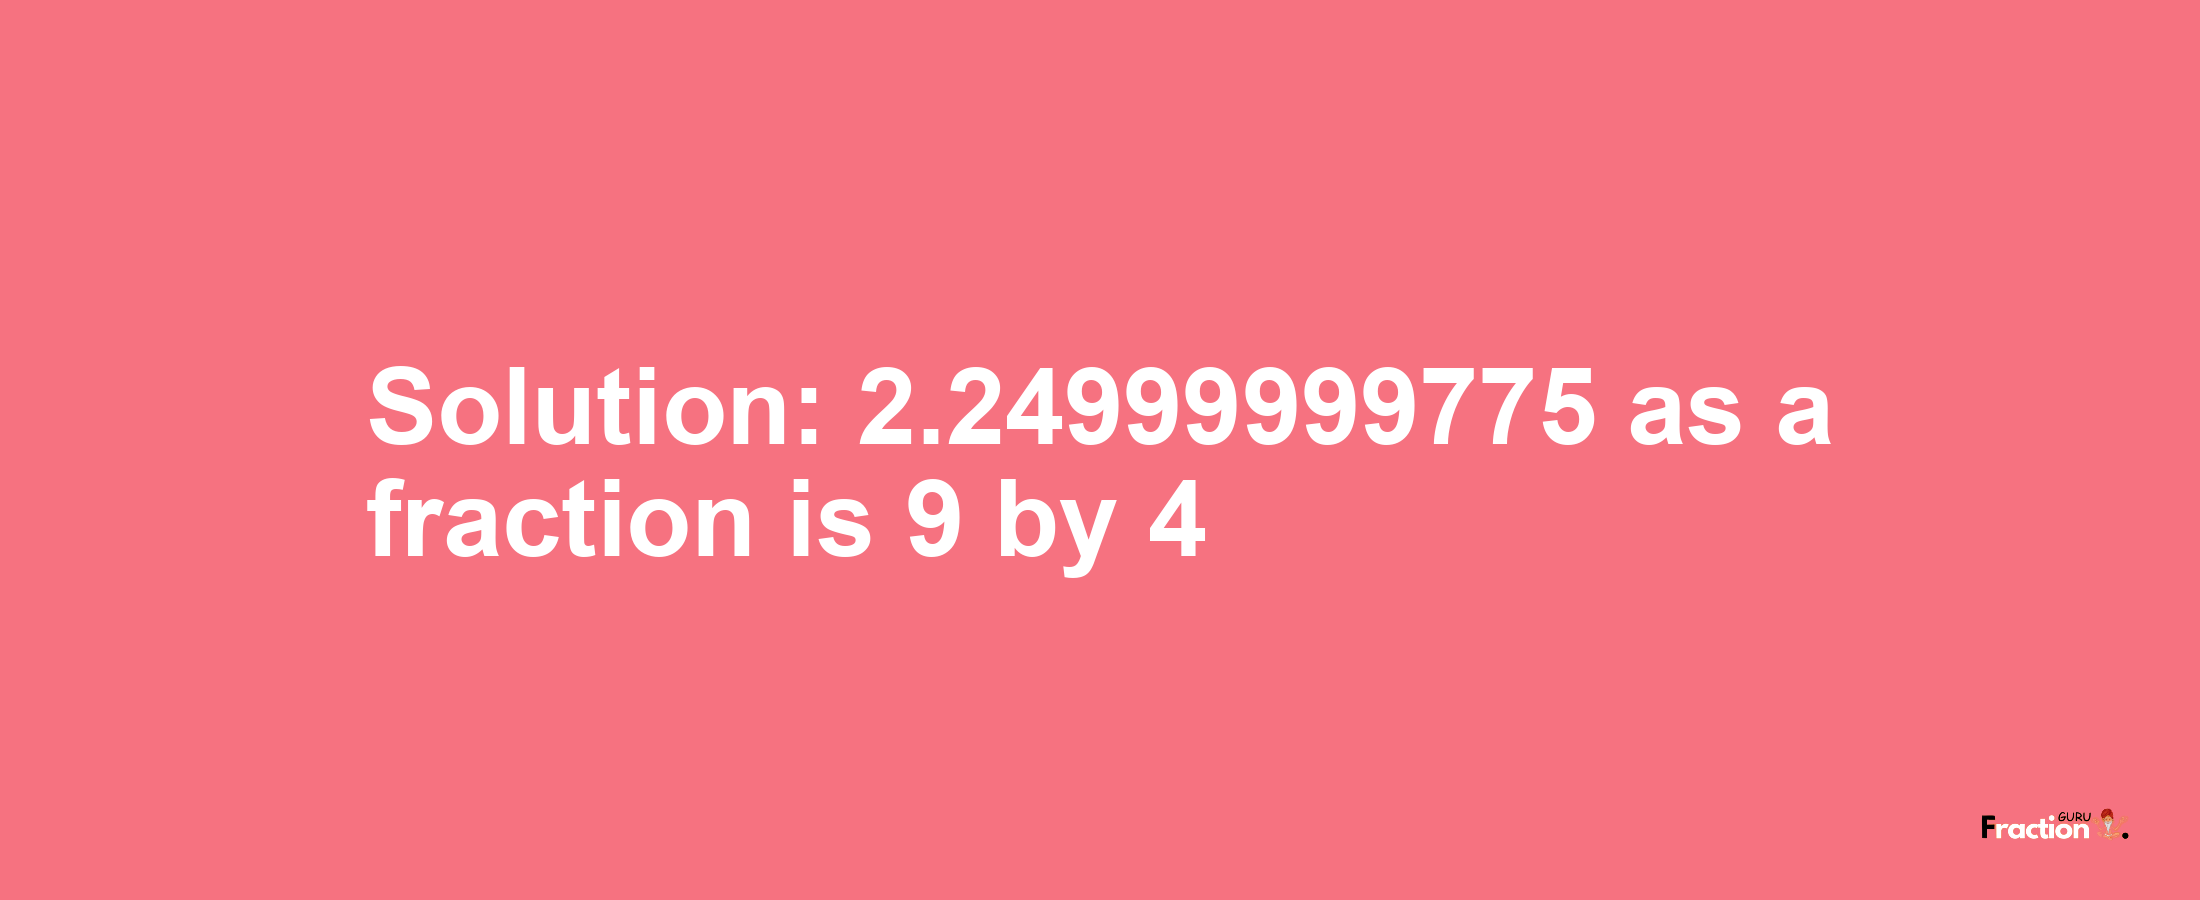 Solution:2.24999999775 as a fraction is 9/4